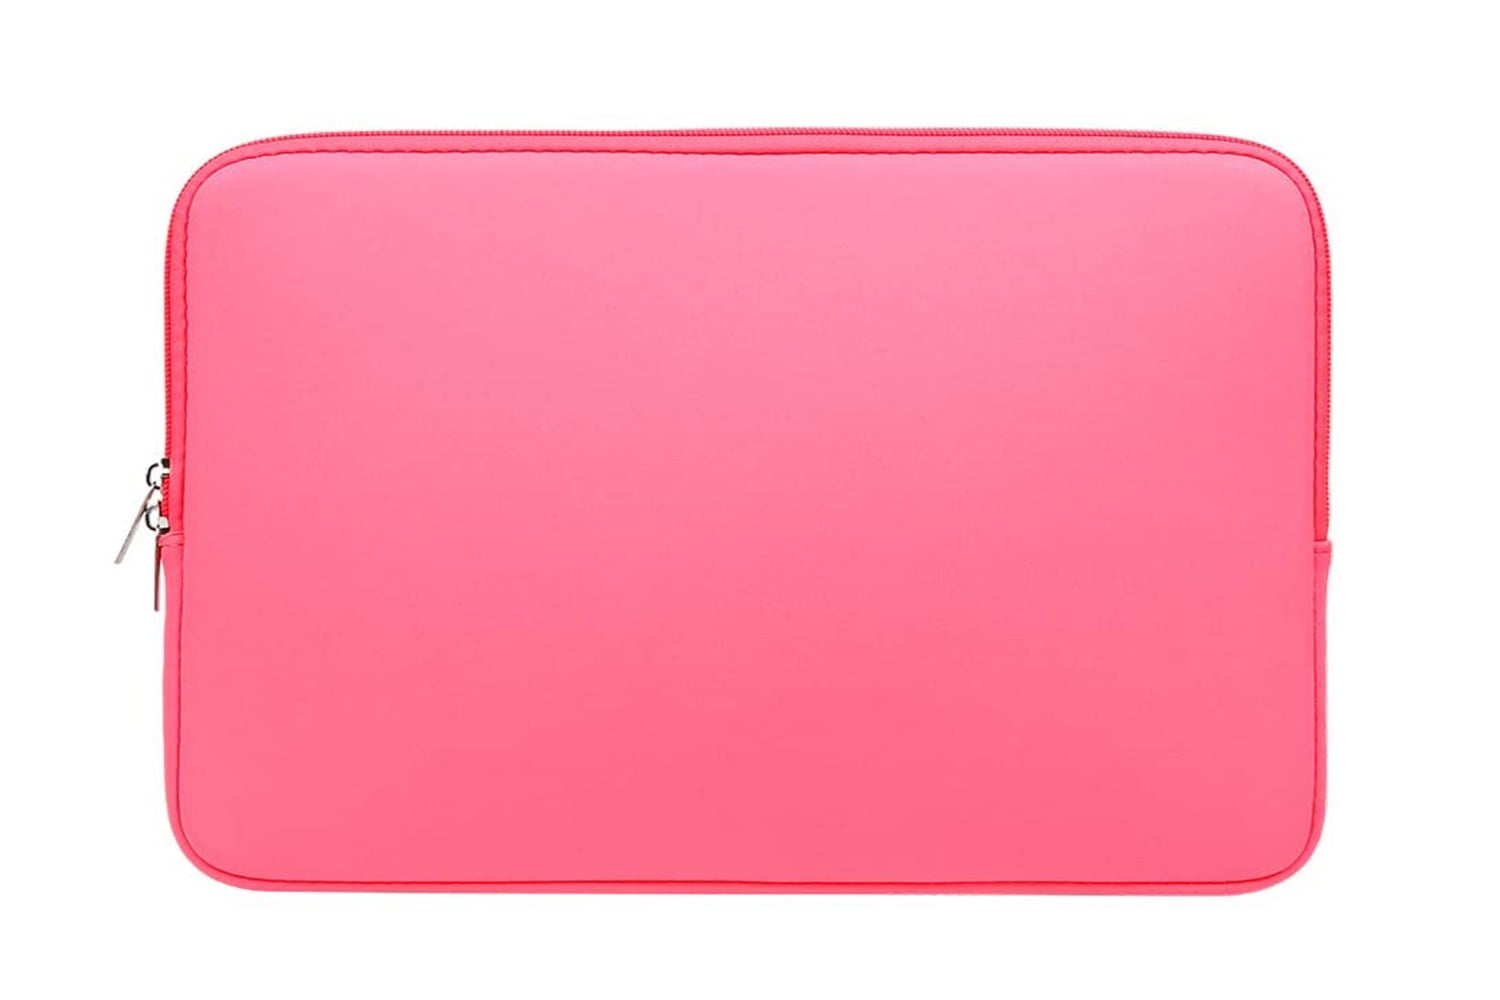 RAINYEAR 11-11.6 Inch Laptop Sleeve Protective Case Soft Lining ...